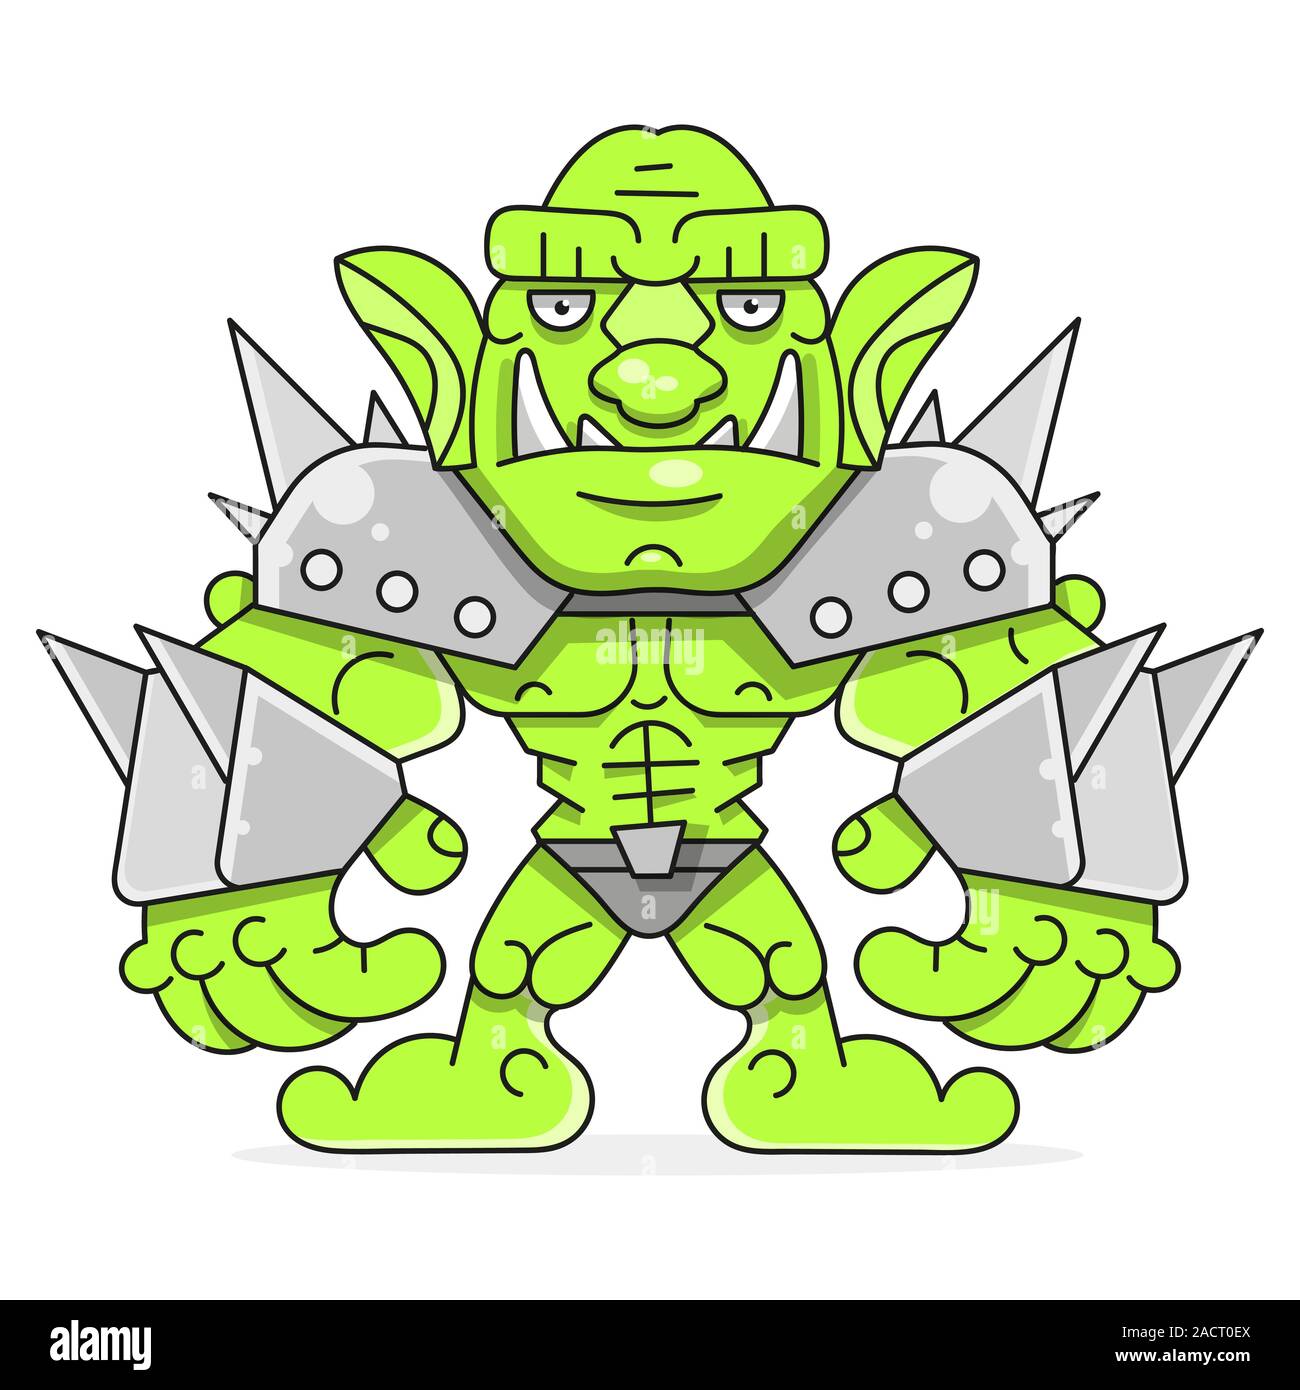 A Cartoon Of A Muscular Orc In Armor.vector Illustration For Kids Stock Vector